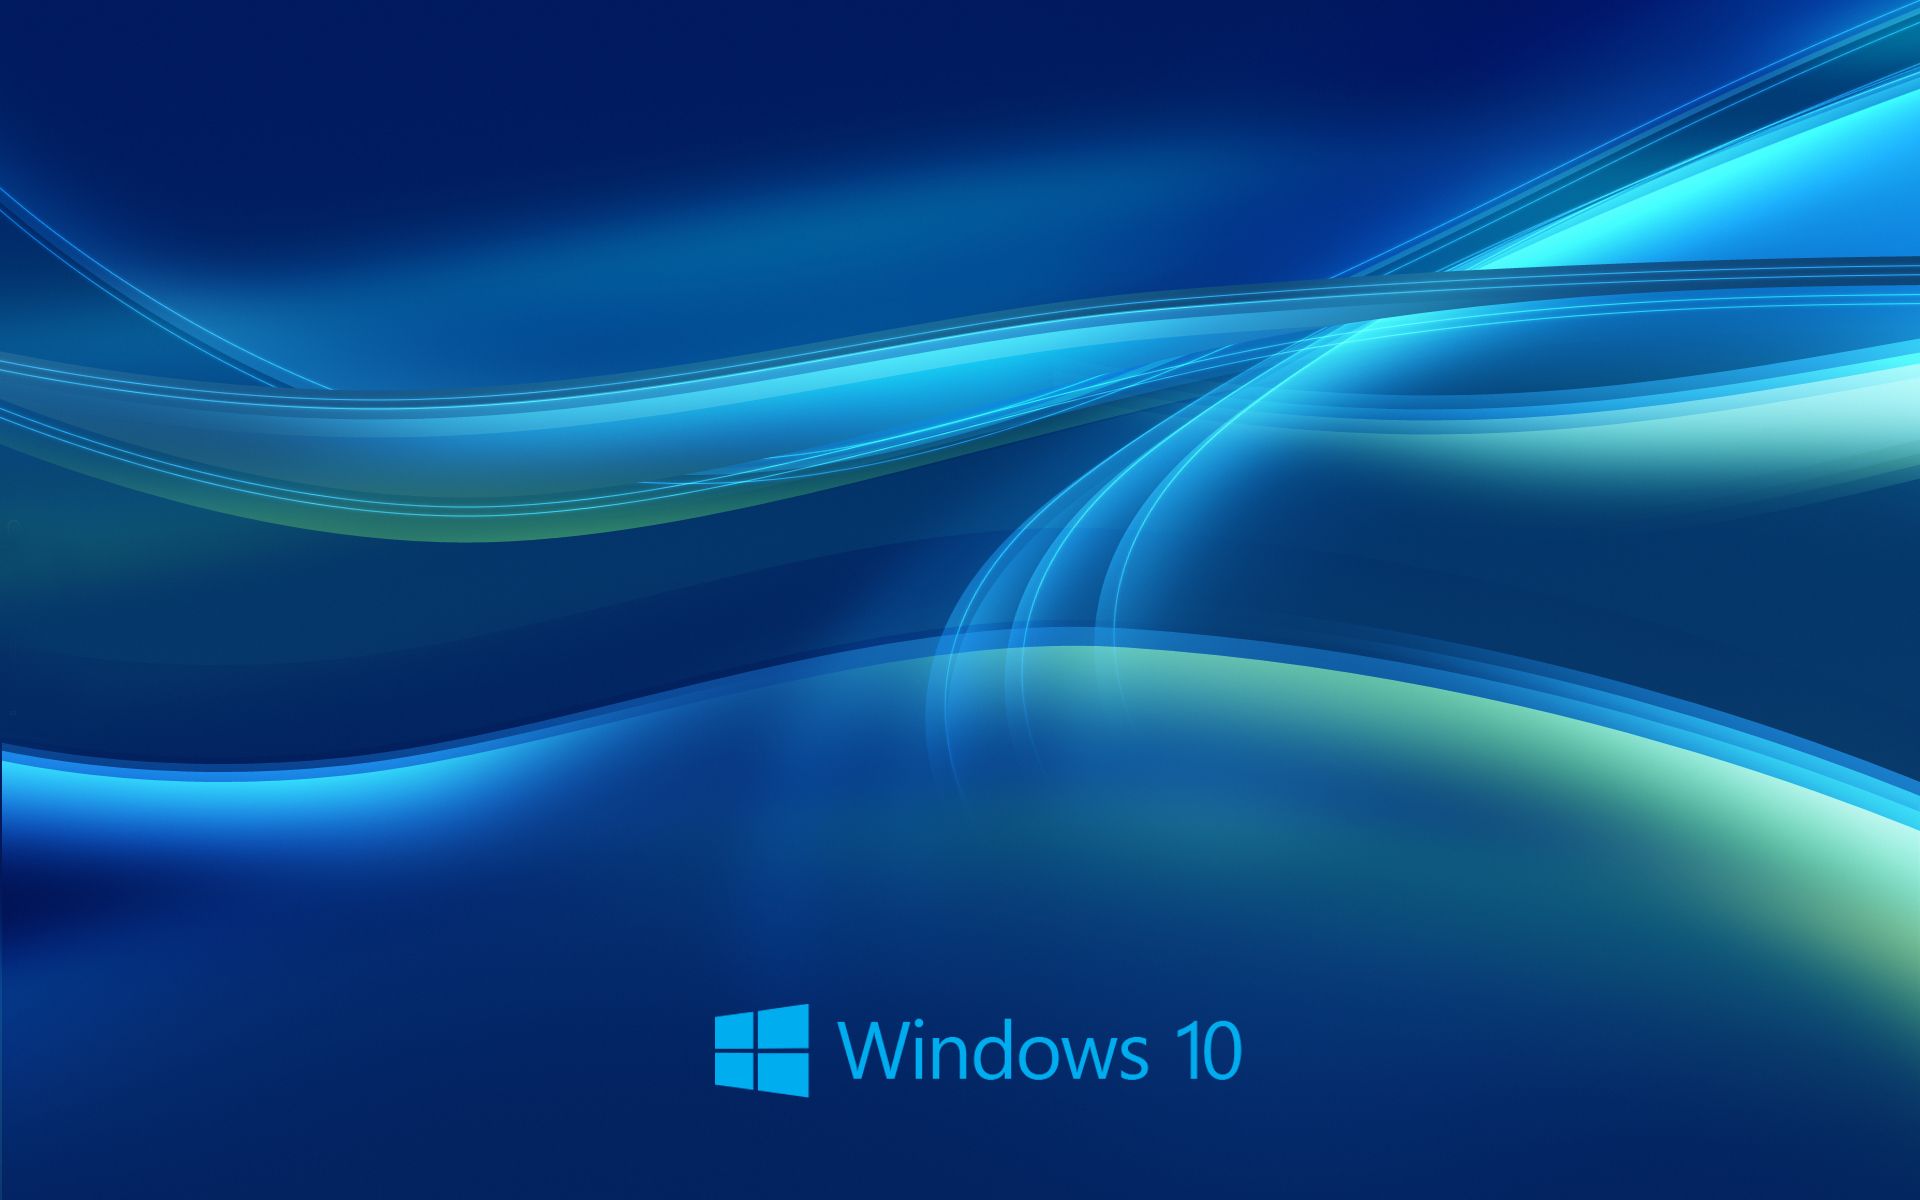 46+] Free Windows 10 Wallpapers Themes